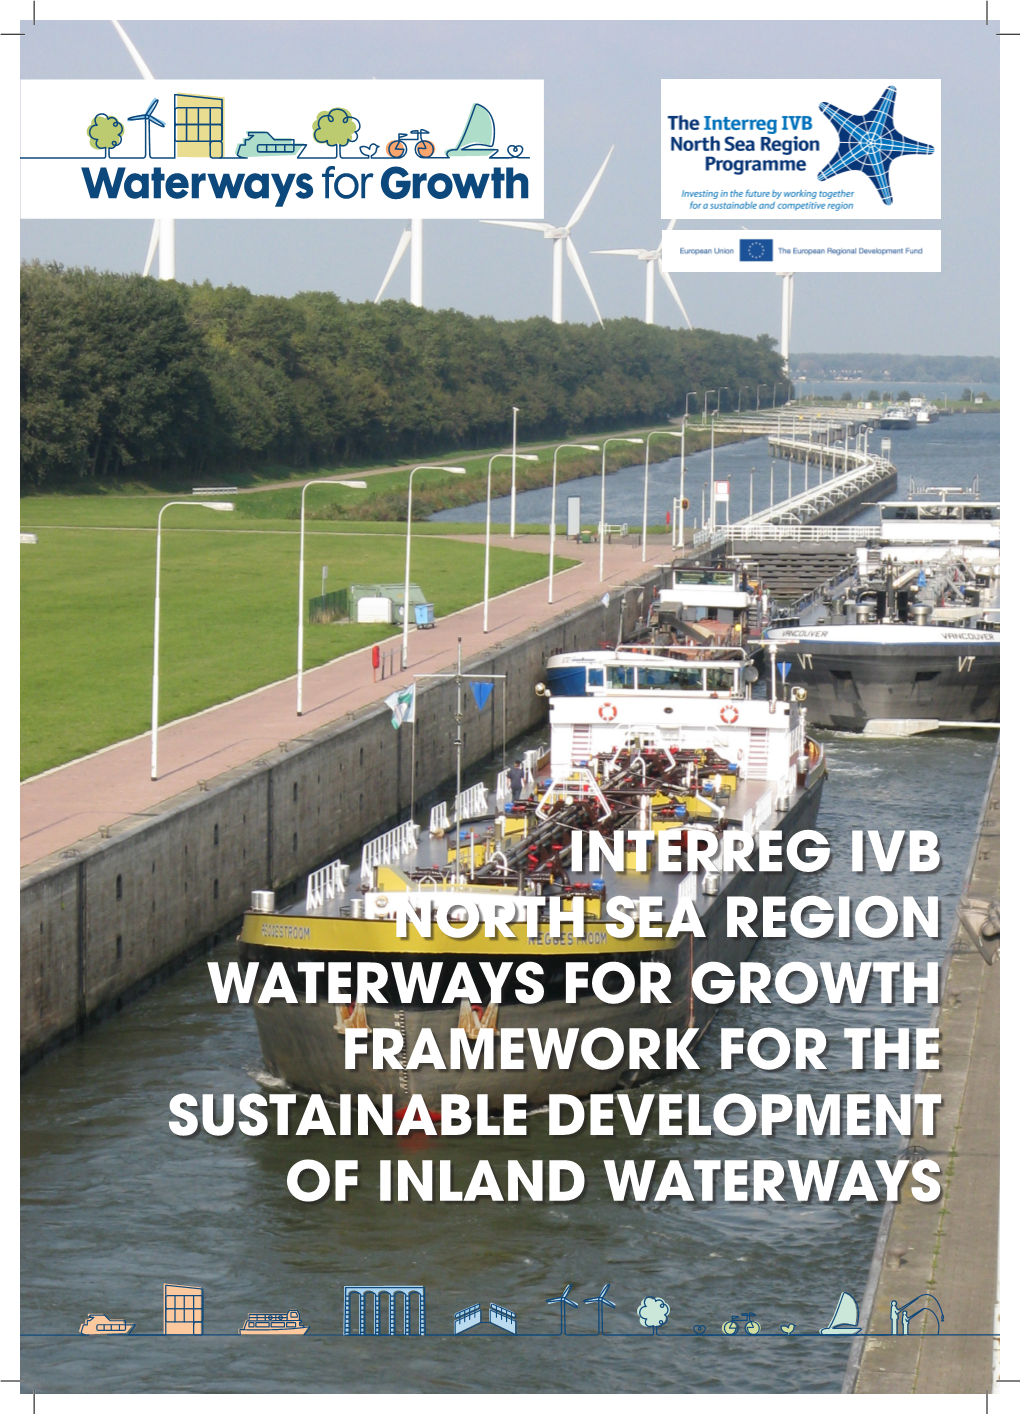 Interreg Ivb North Sea Region Waterways for Growth Framework for the Sustainable Development of Inland Waterways Blank Inside Cover Introduction